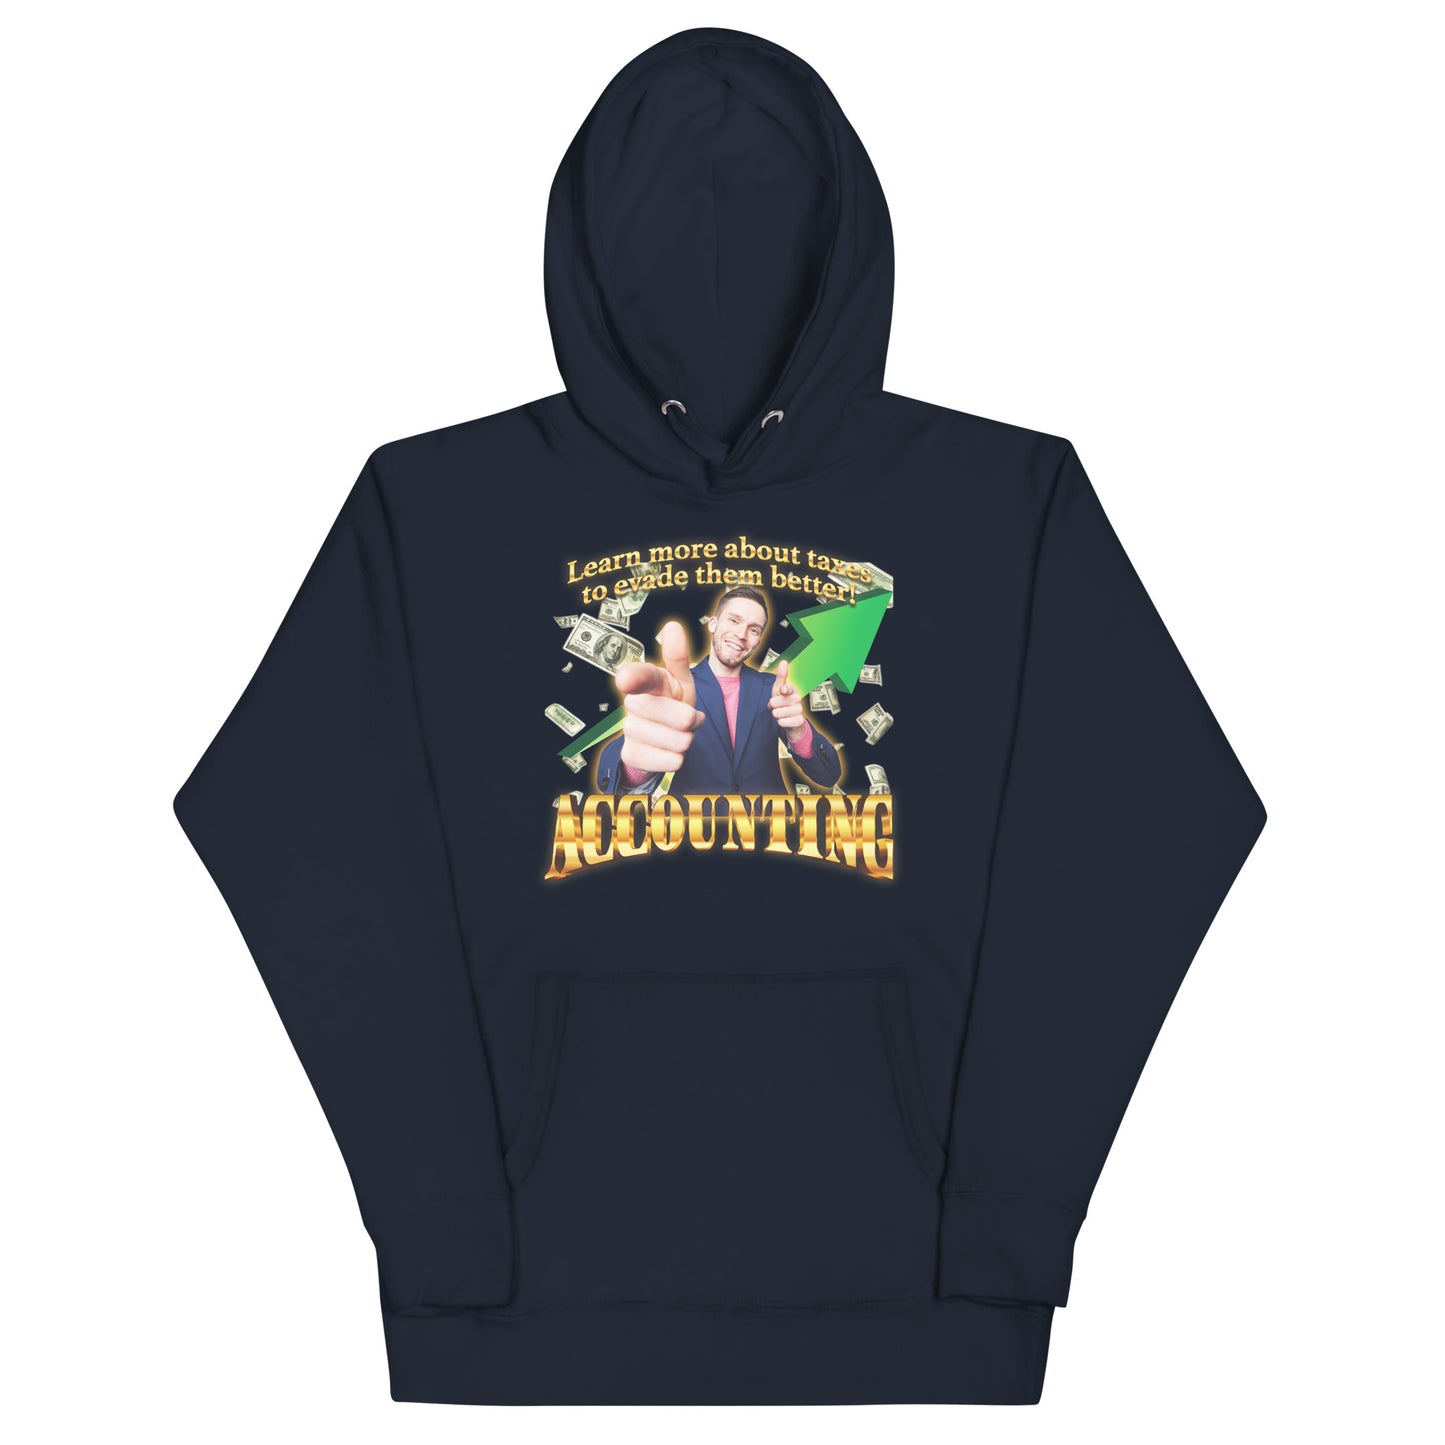 Accounting (Evade Taxes) Unisex Hoodie